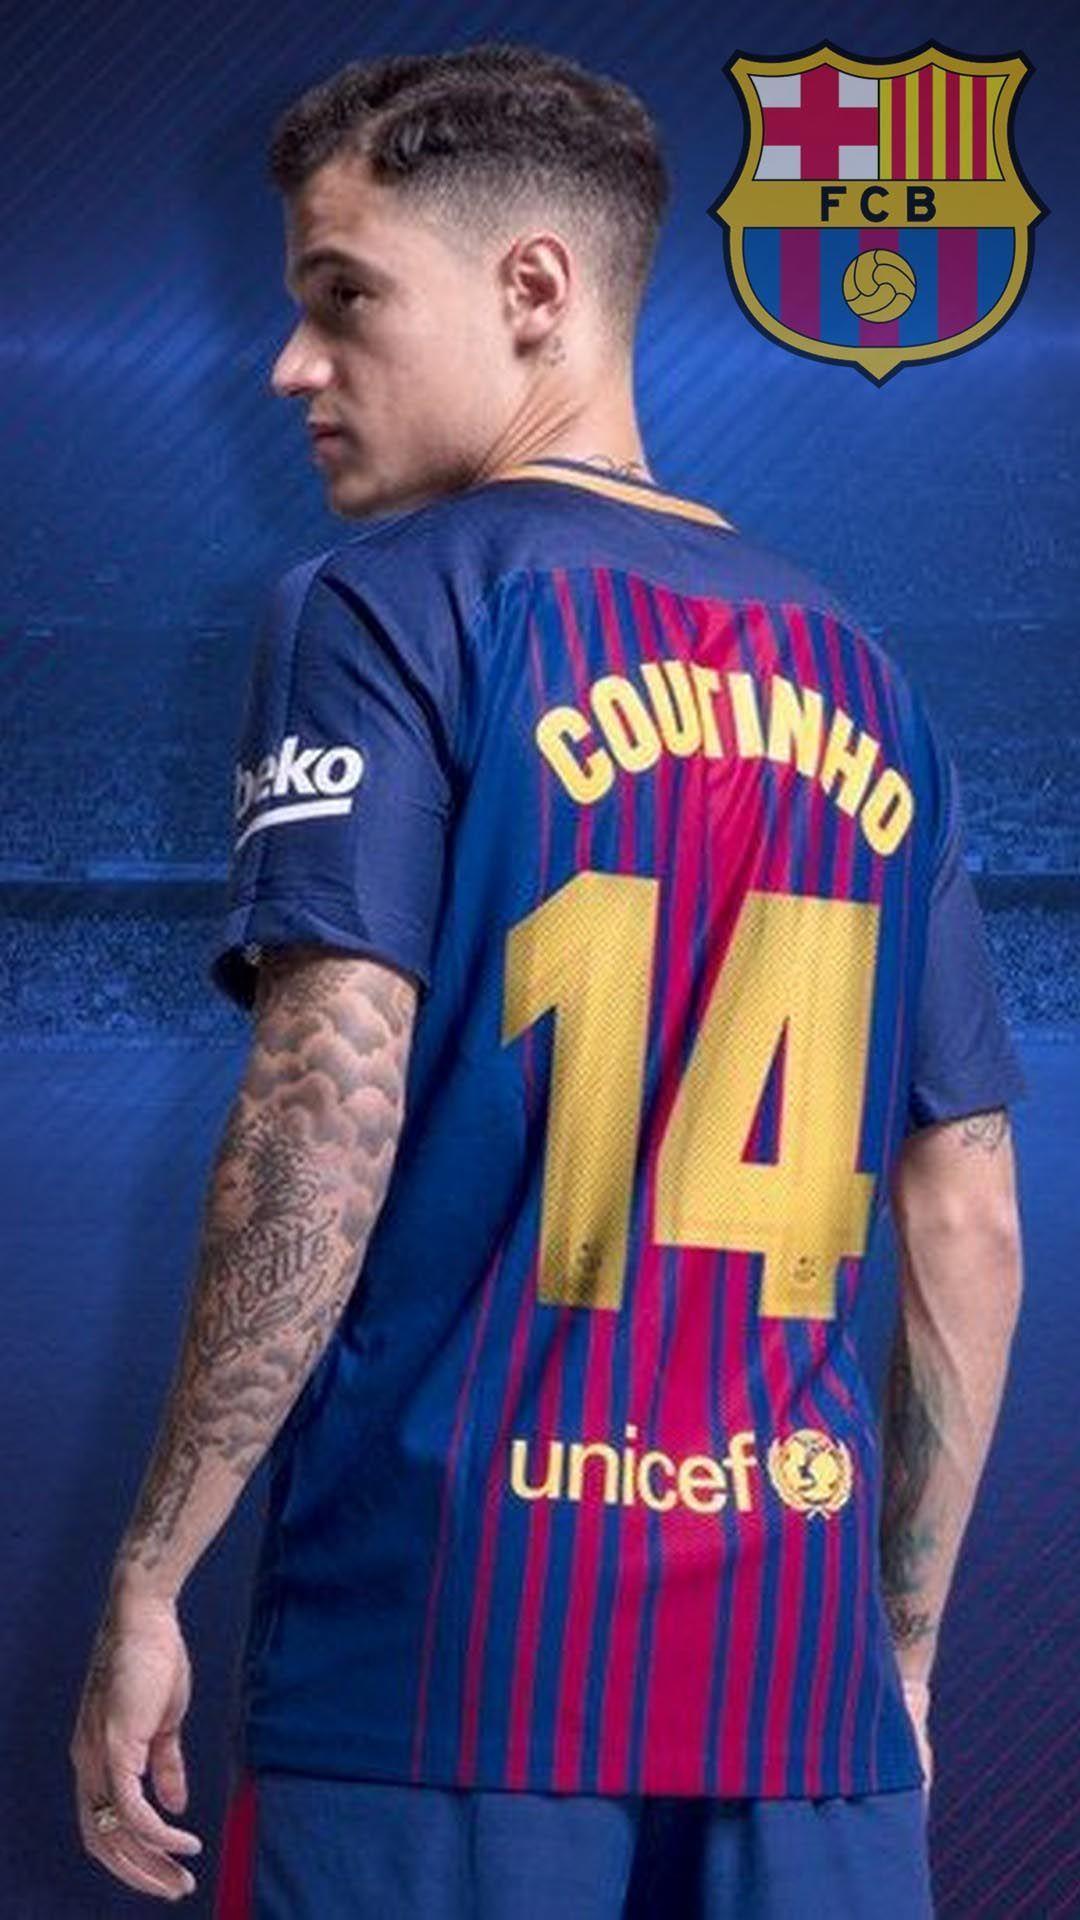 FC Barcelona Coutinho Android Wallpaper Android Wallpaper